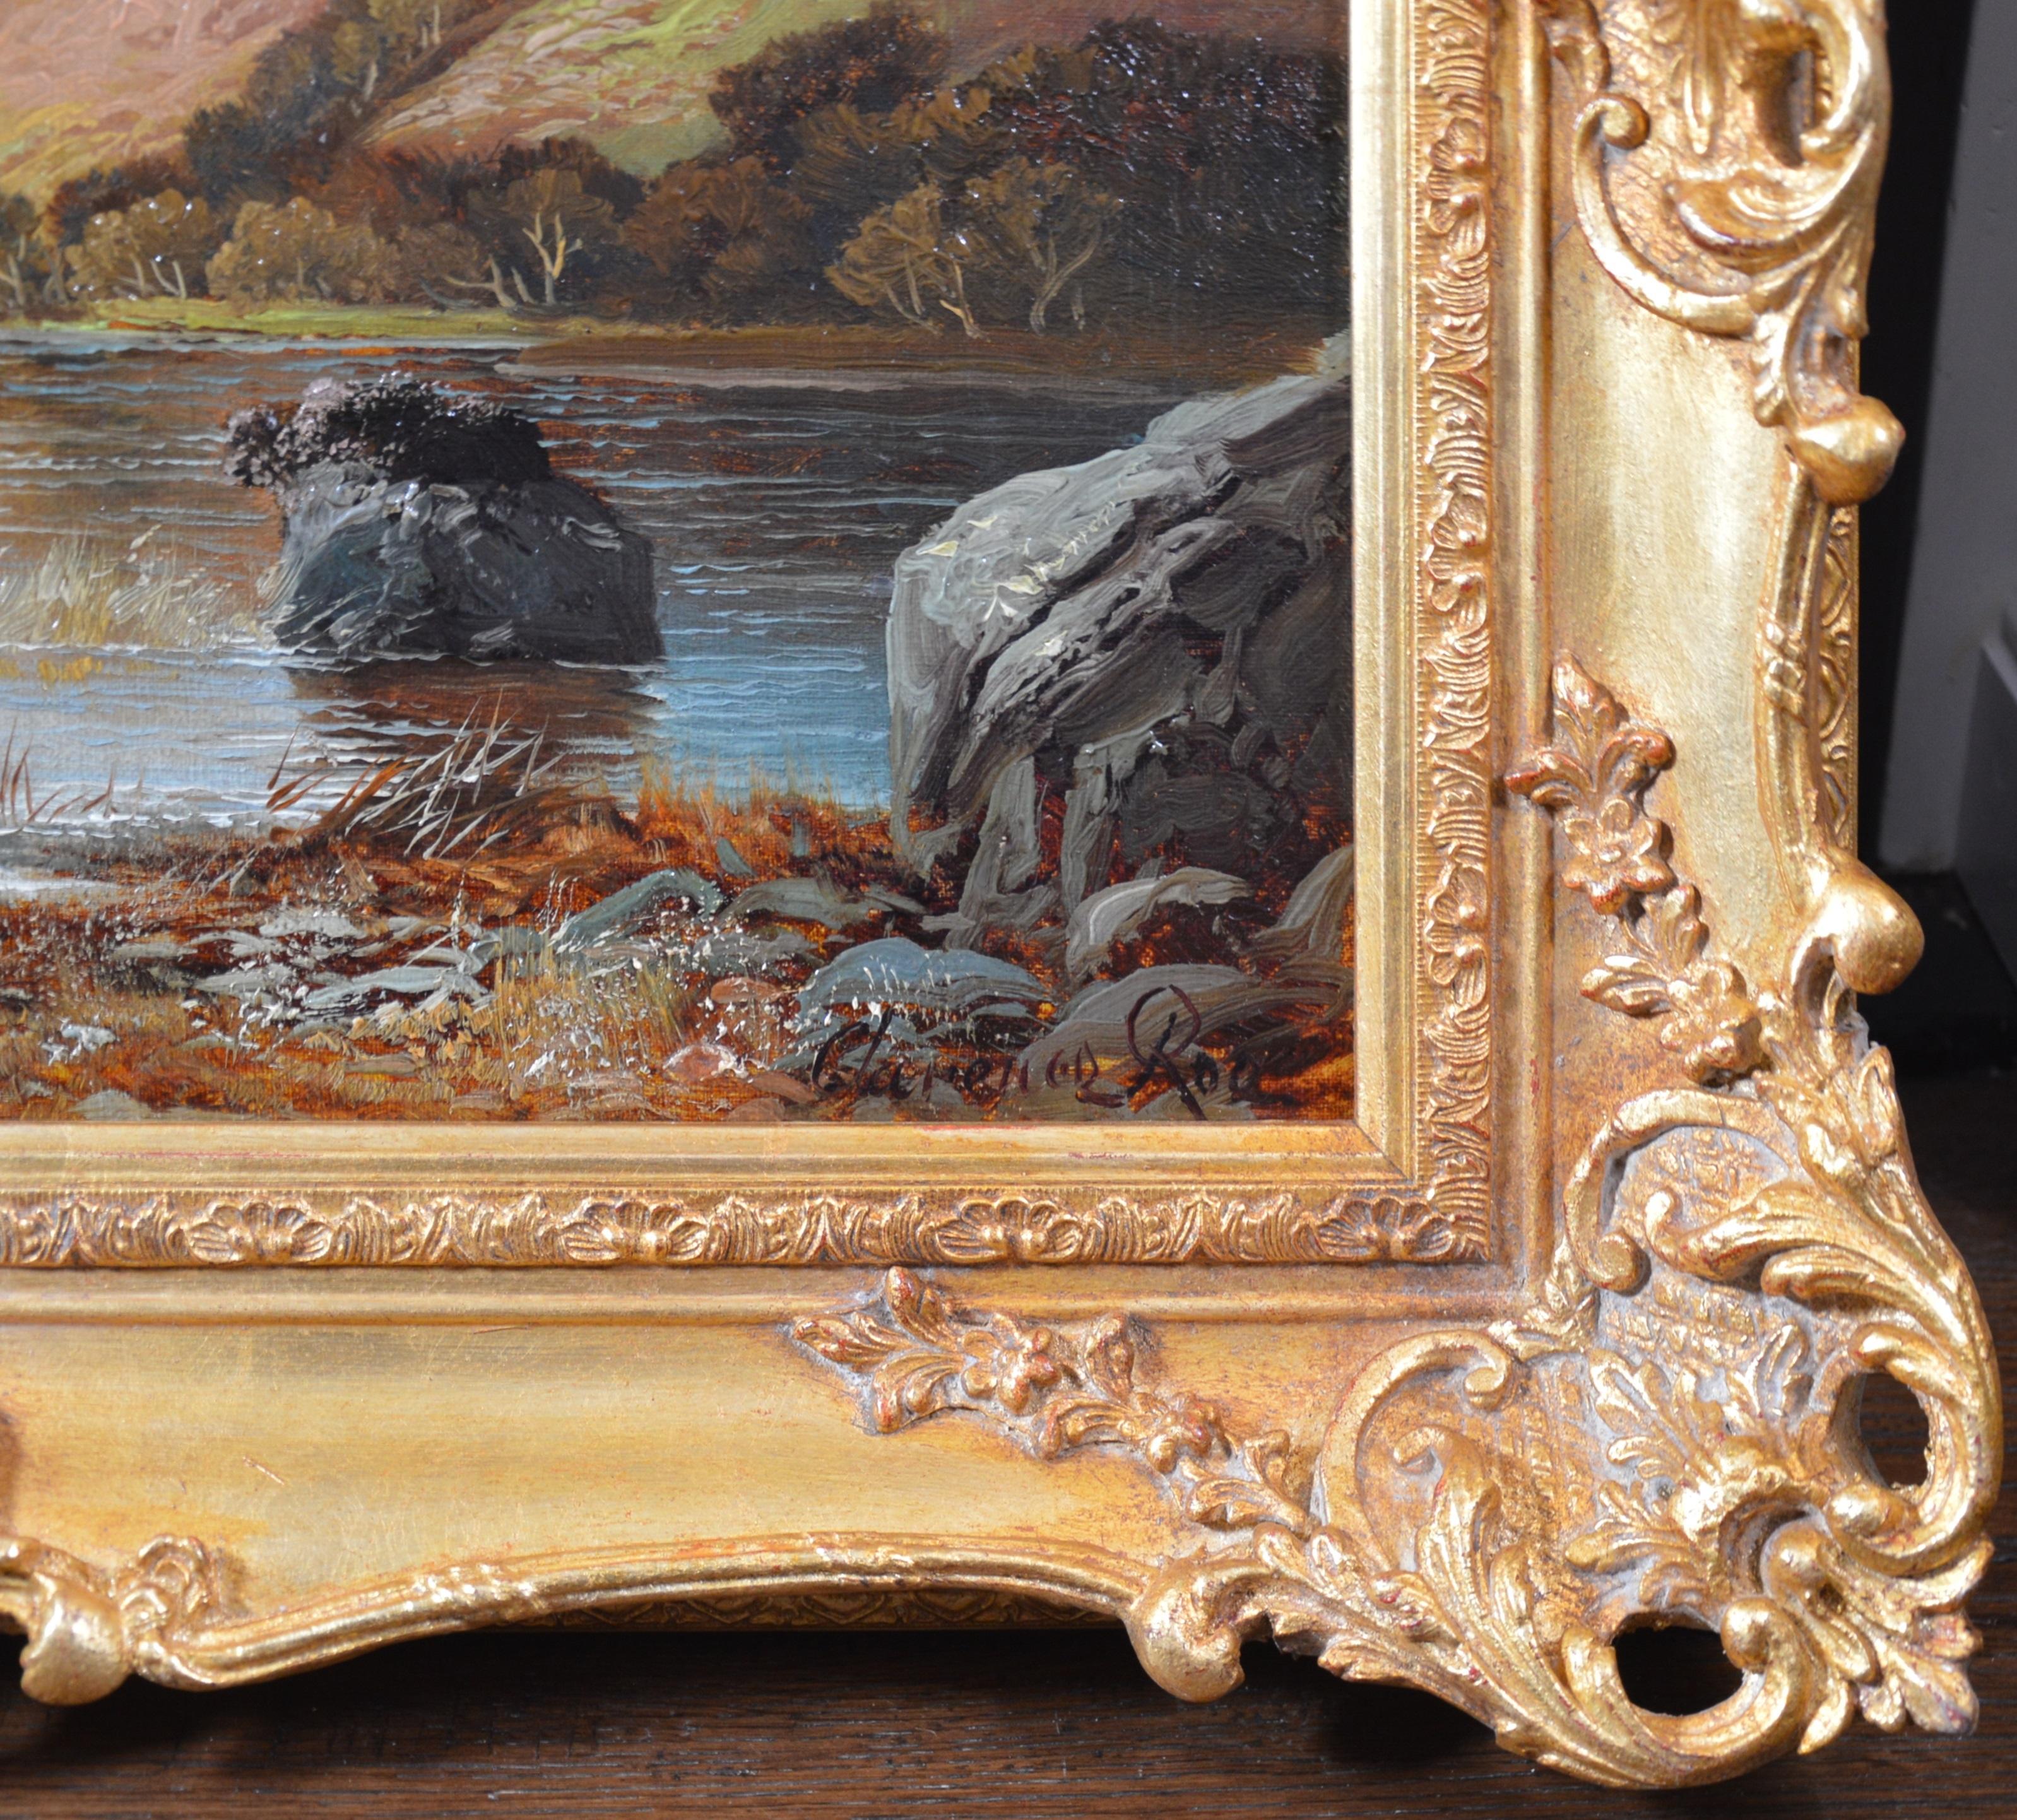 Rydal Water, Westmorland - 19th Century Landscape Oil Painting of Lake District  4